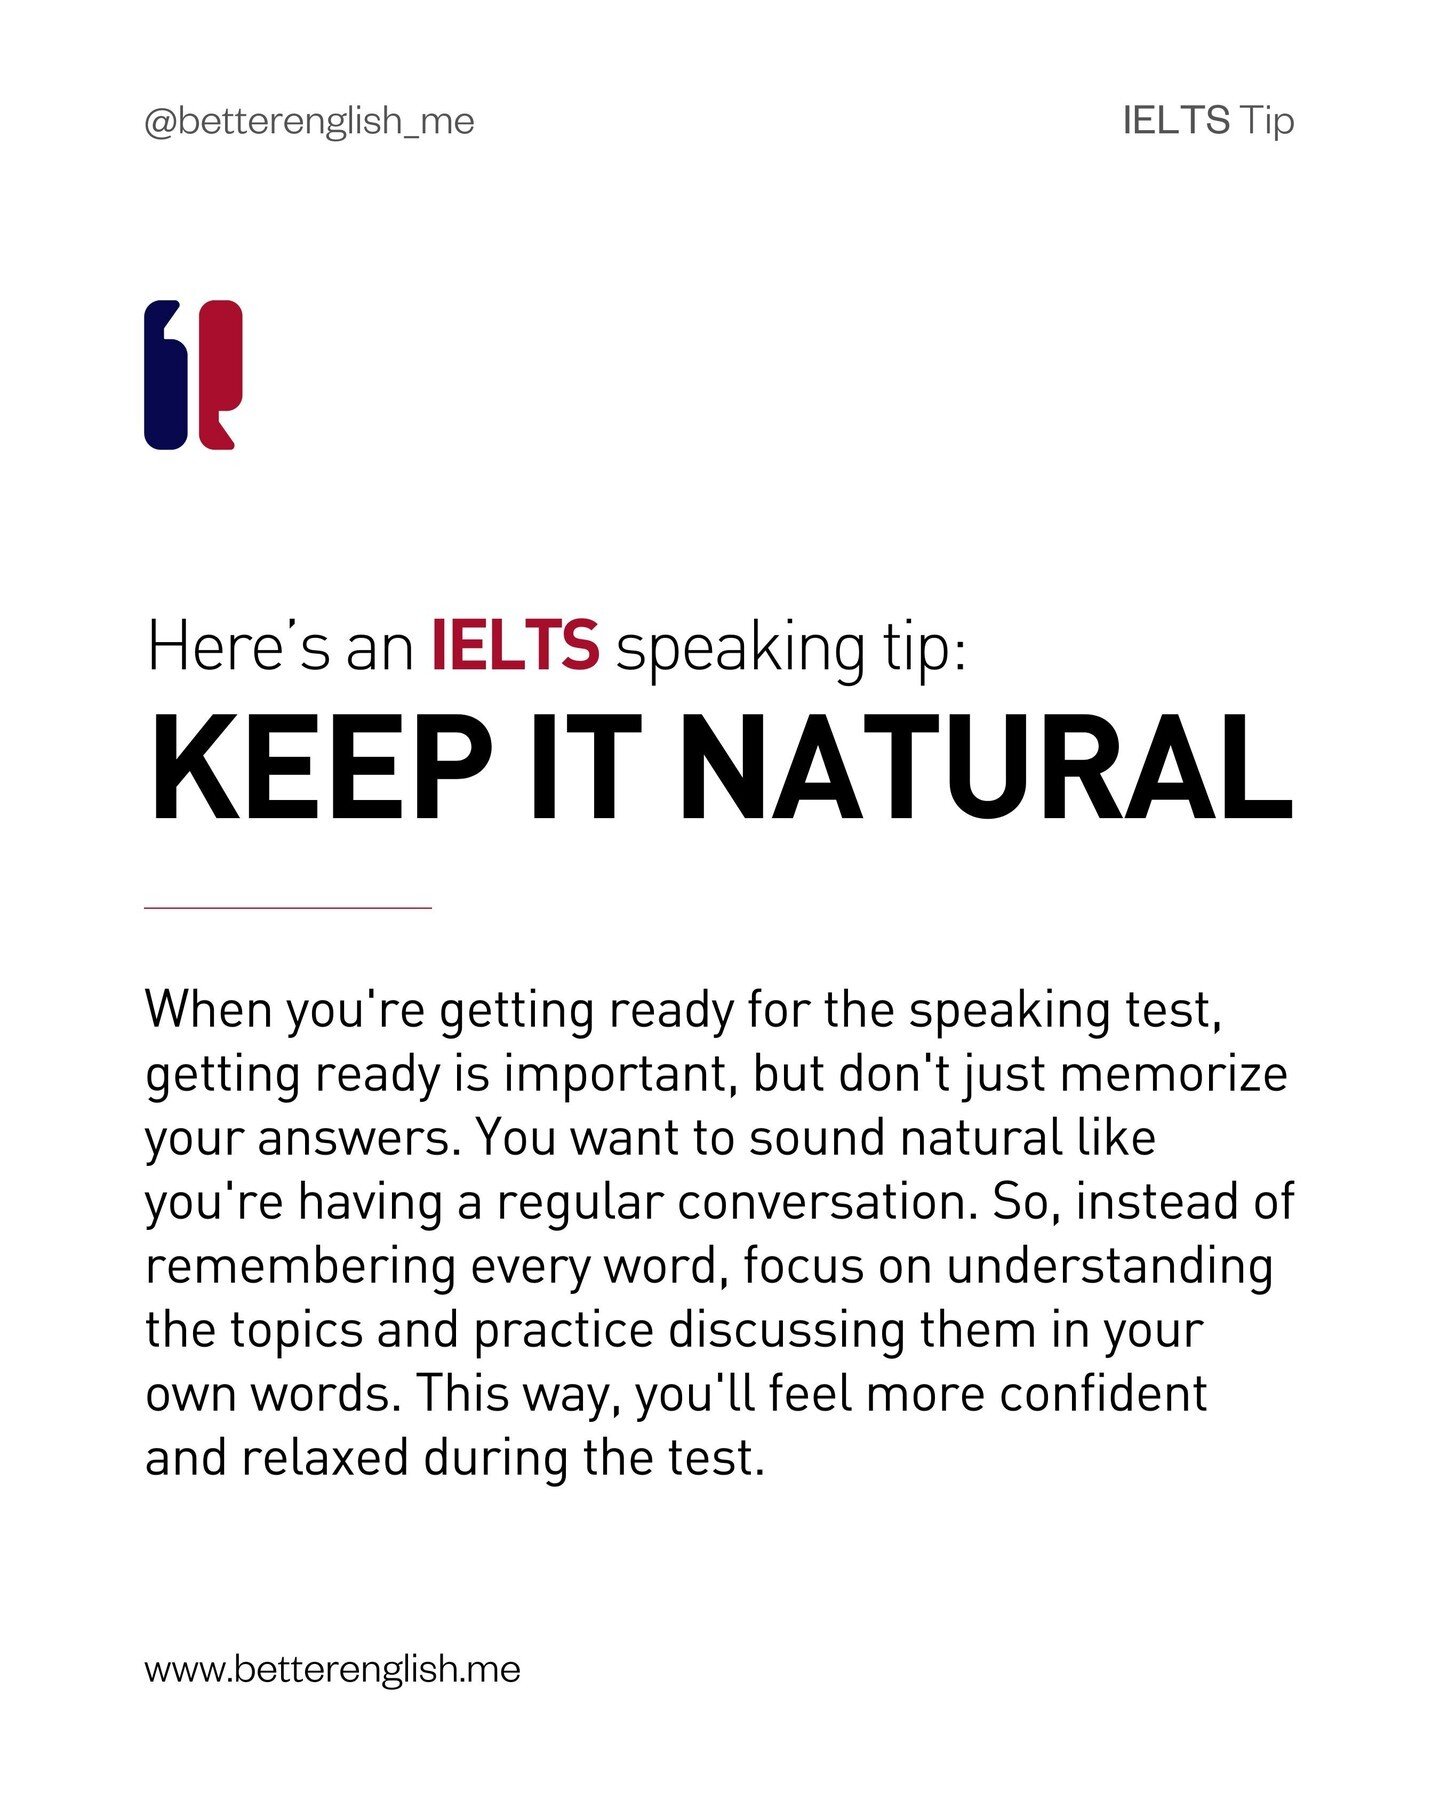 🗣️ Getting ready for your speaking test? Remember: prep is key, but keep it natural! Avoid memorizing answers and focus on understanding the topics. Your goal? To sound relaxed and spontaneous during the test. 🎙️💬 

Share some issues that frustrat